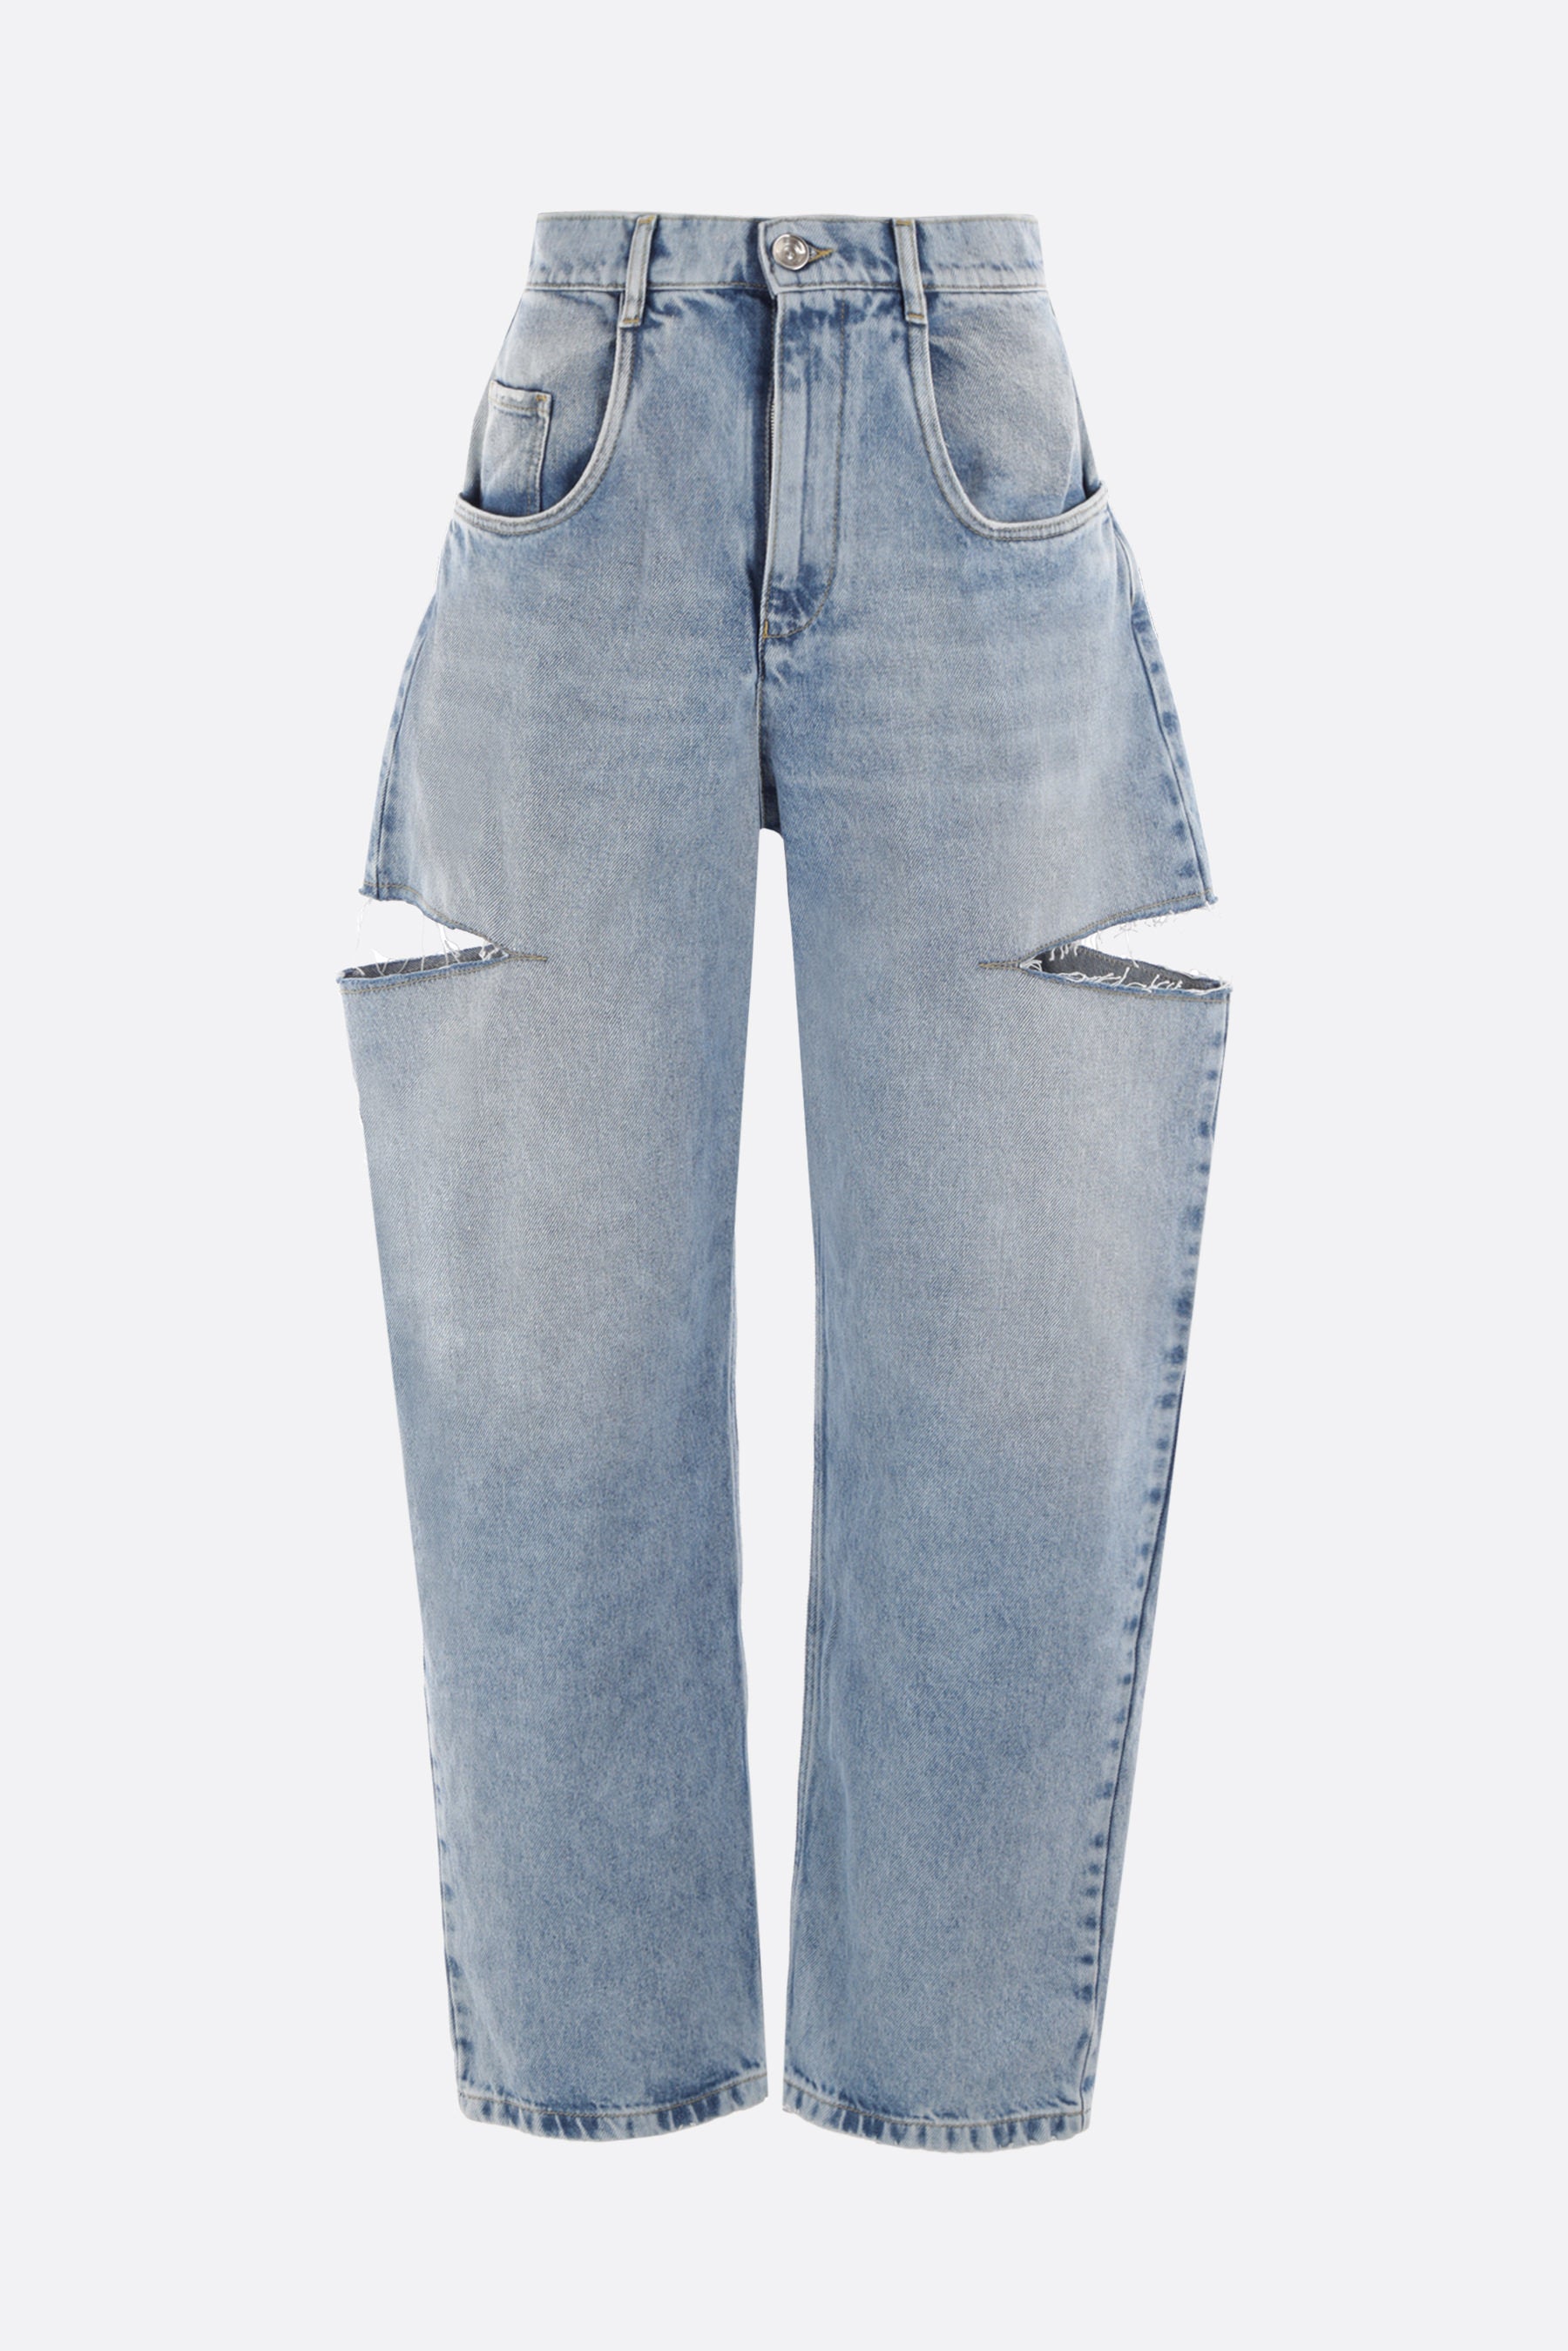 denim wide-leg jeans with cut-out